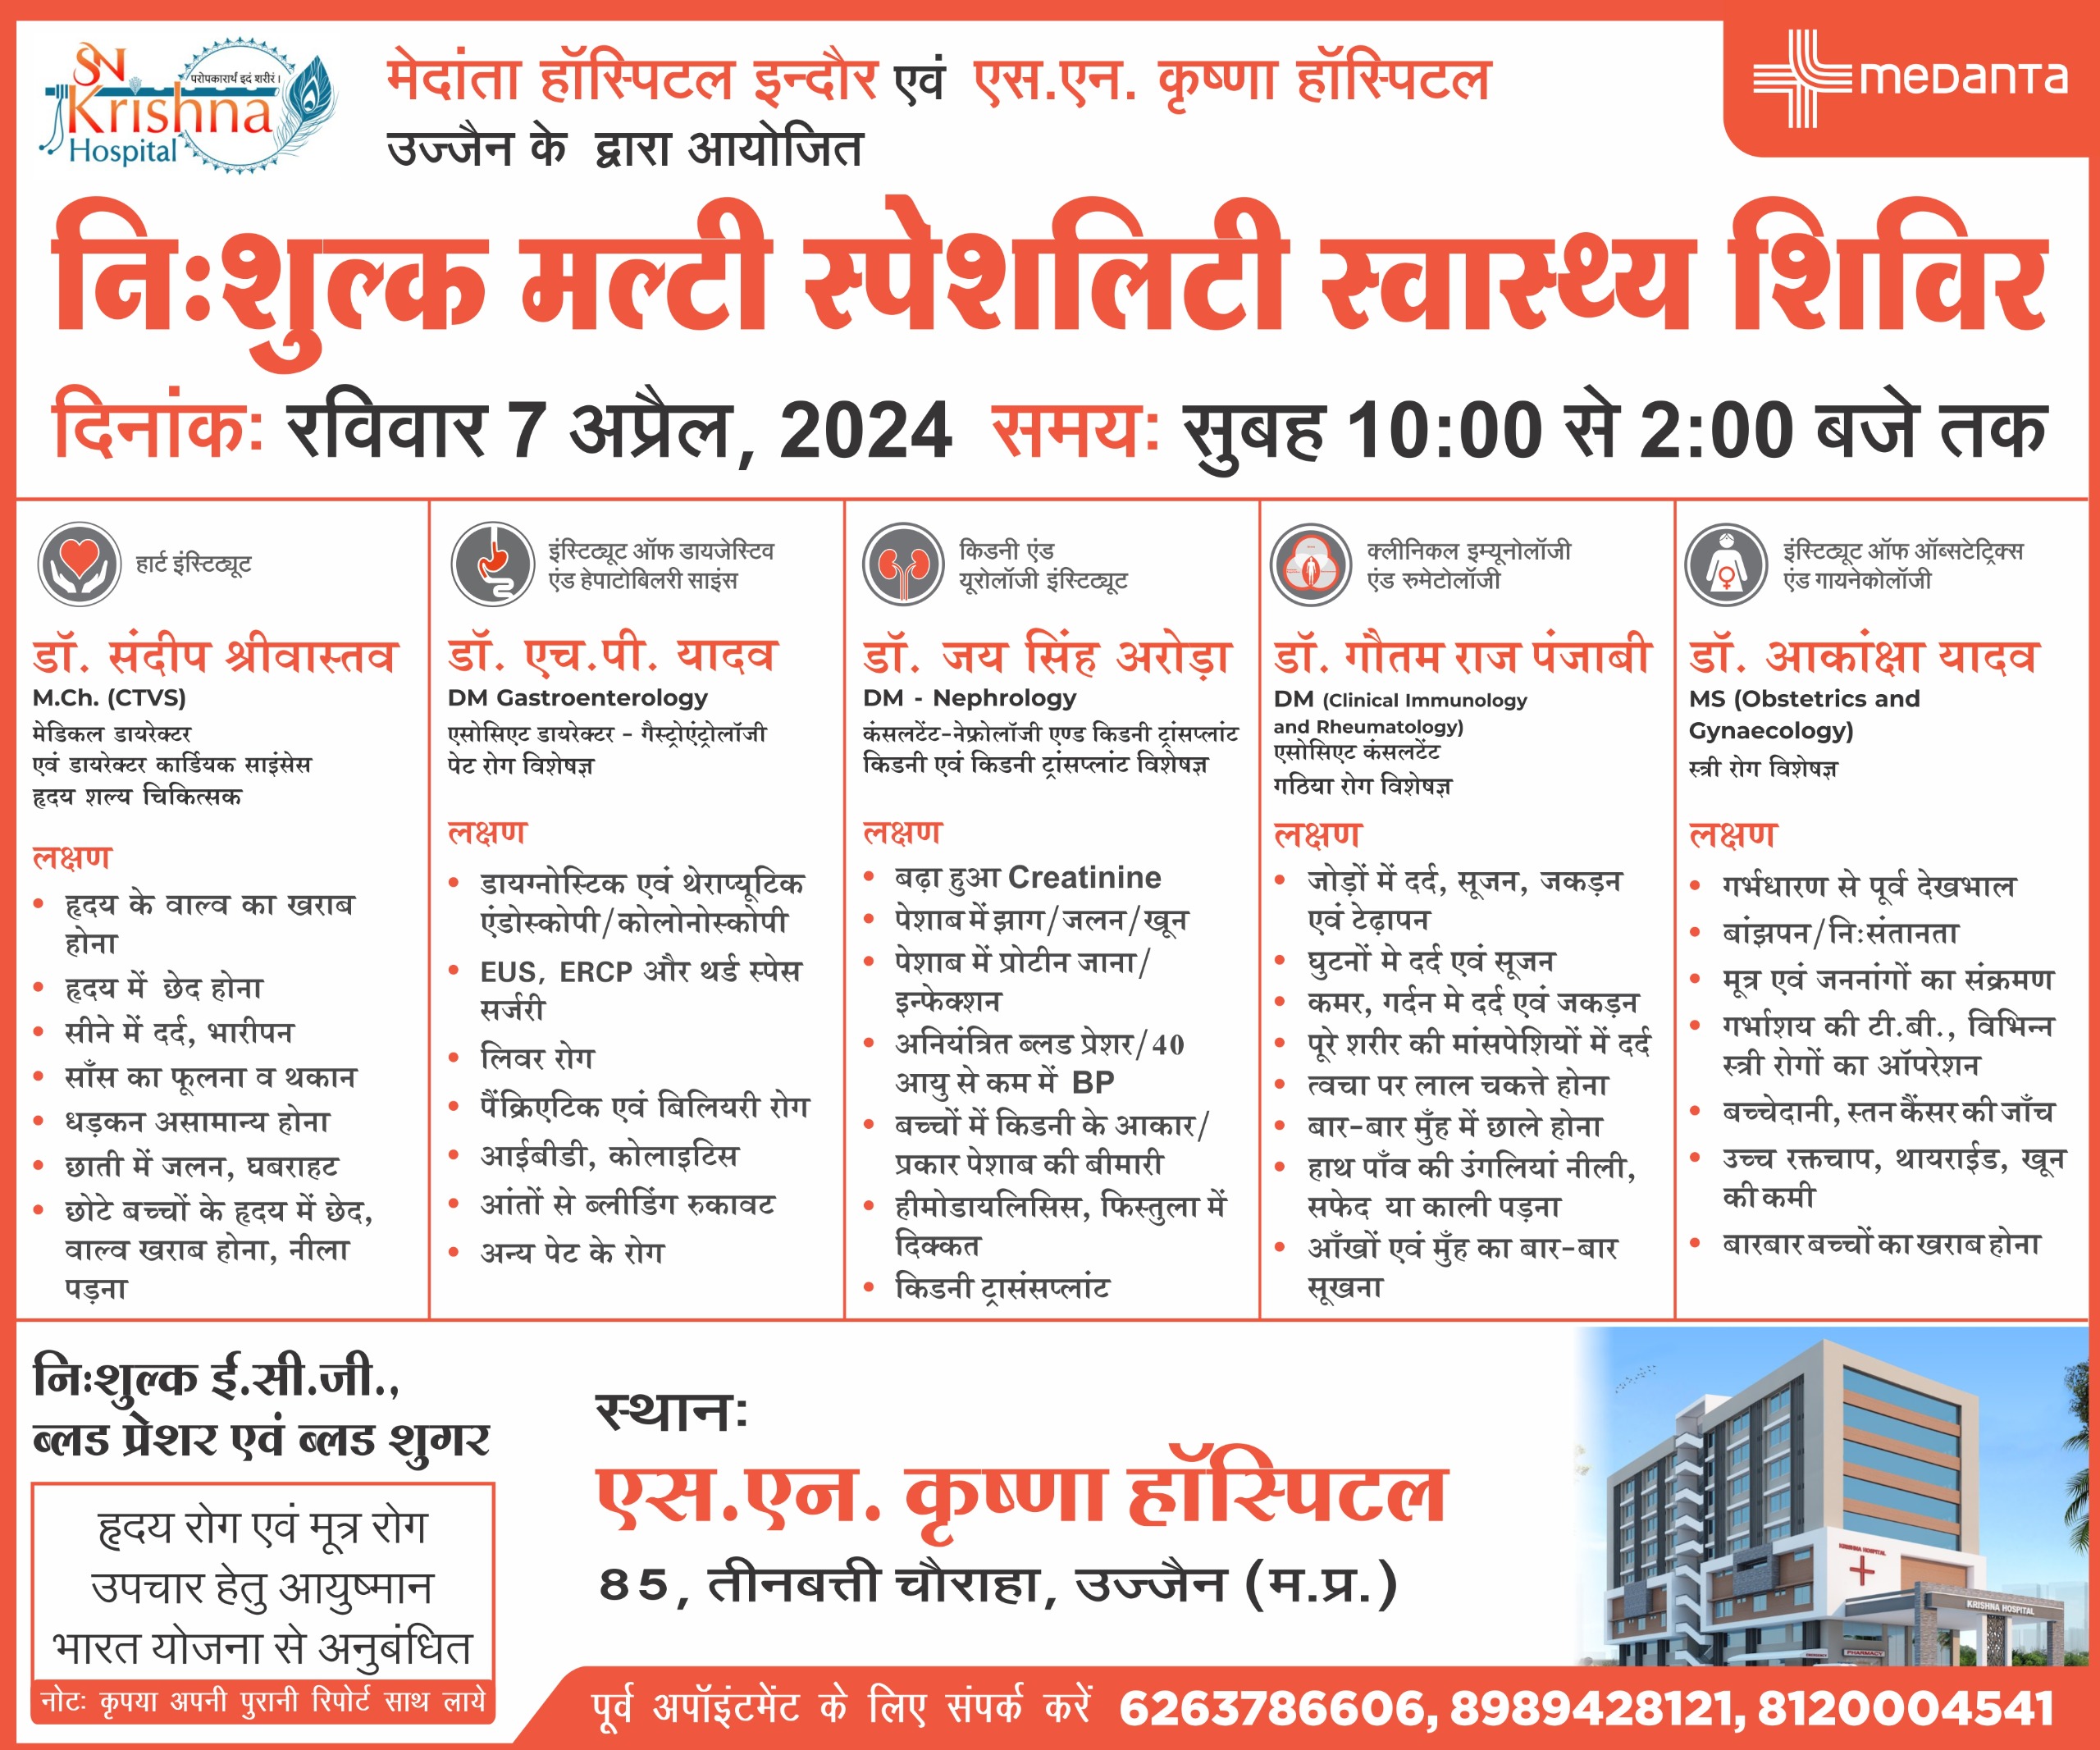 Special Initiative by Medanta Super Specialty Hospital on World Health Day: Free Multi-Specialty Health Camp in Ujjain